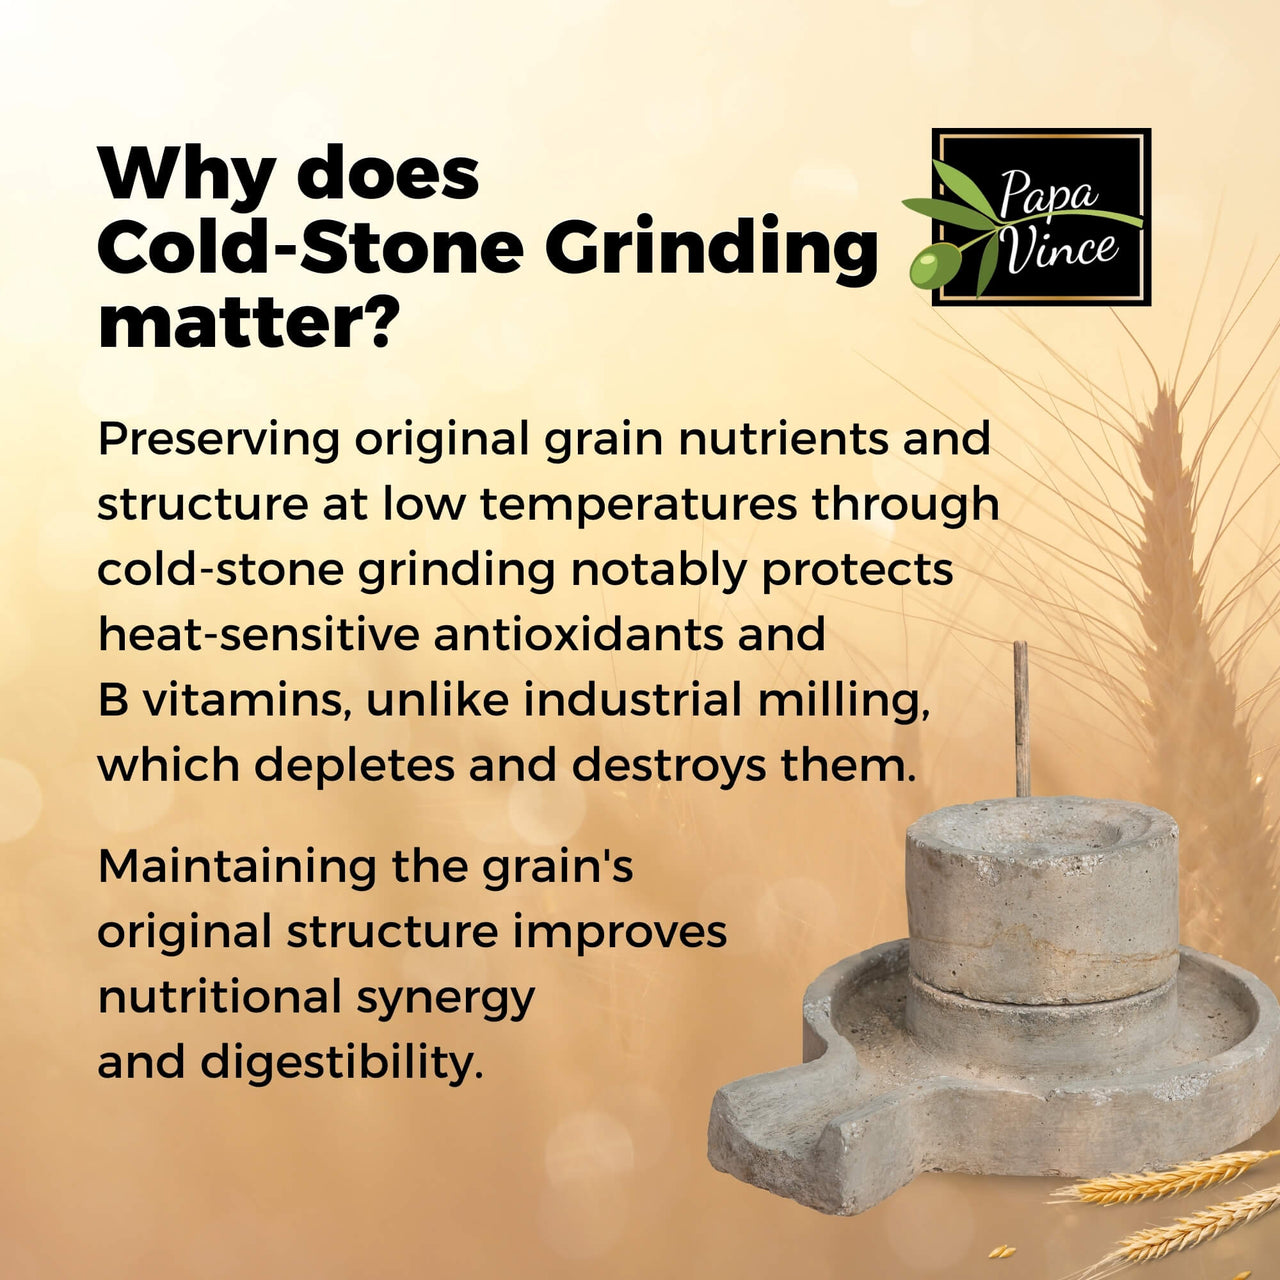 Whole wheat cold stone grinding pasta, non gmo, non enriched, no folic acid, low gluten ancient grains, sicily Italy, artisanal unrefined, minimally processed, why -Papa Vince